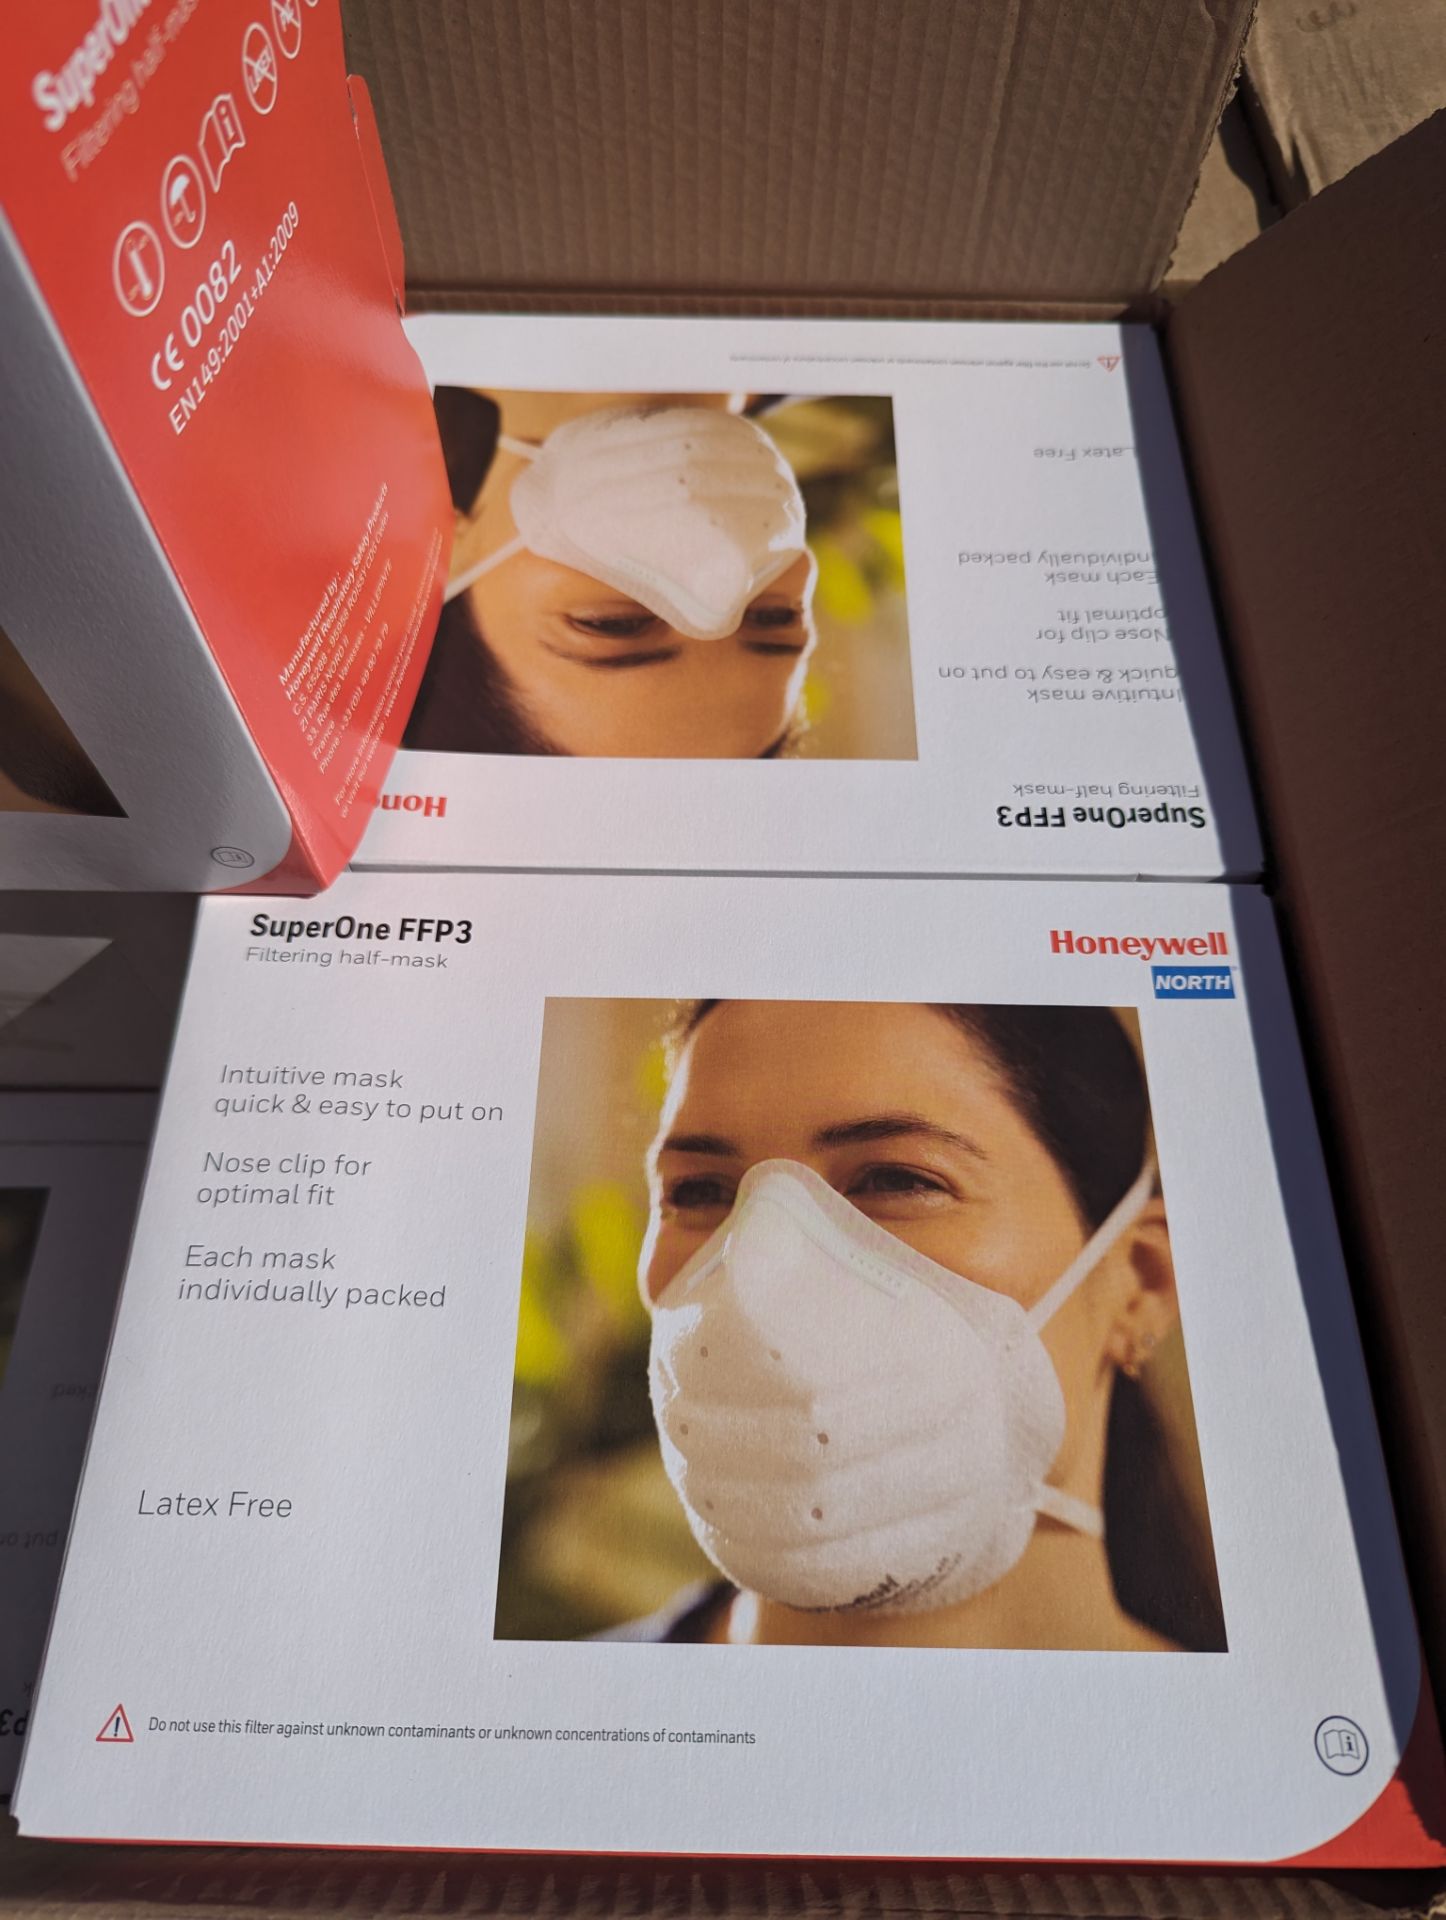 5 x Boxes Honeywell SuperOne FFP3 Filtering Masks - Image 2 of 2